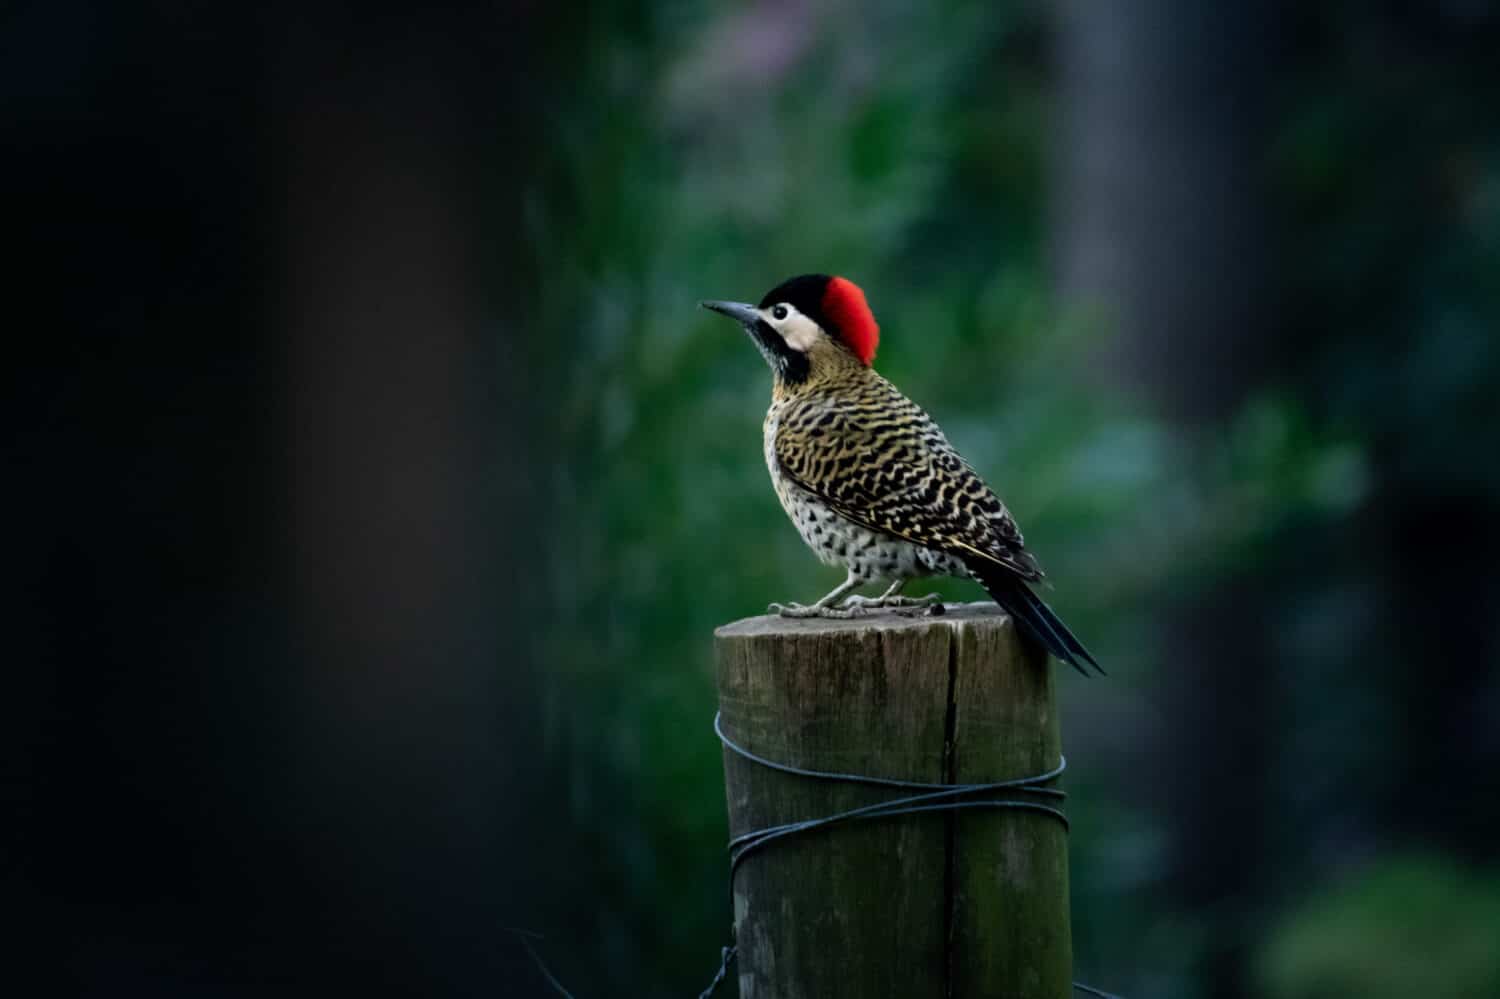 Red-naped Woodpecker perched on a wooden post.